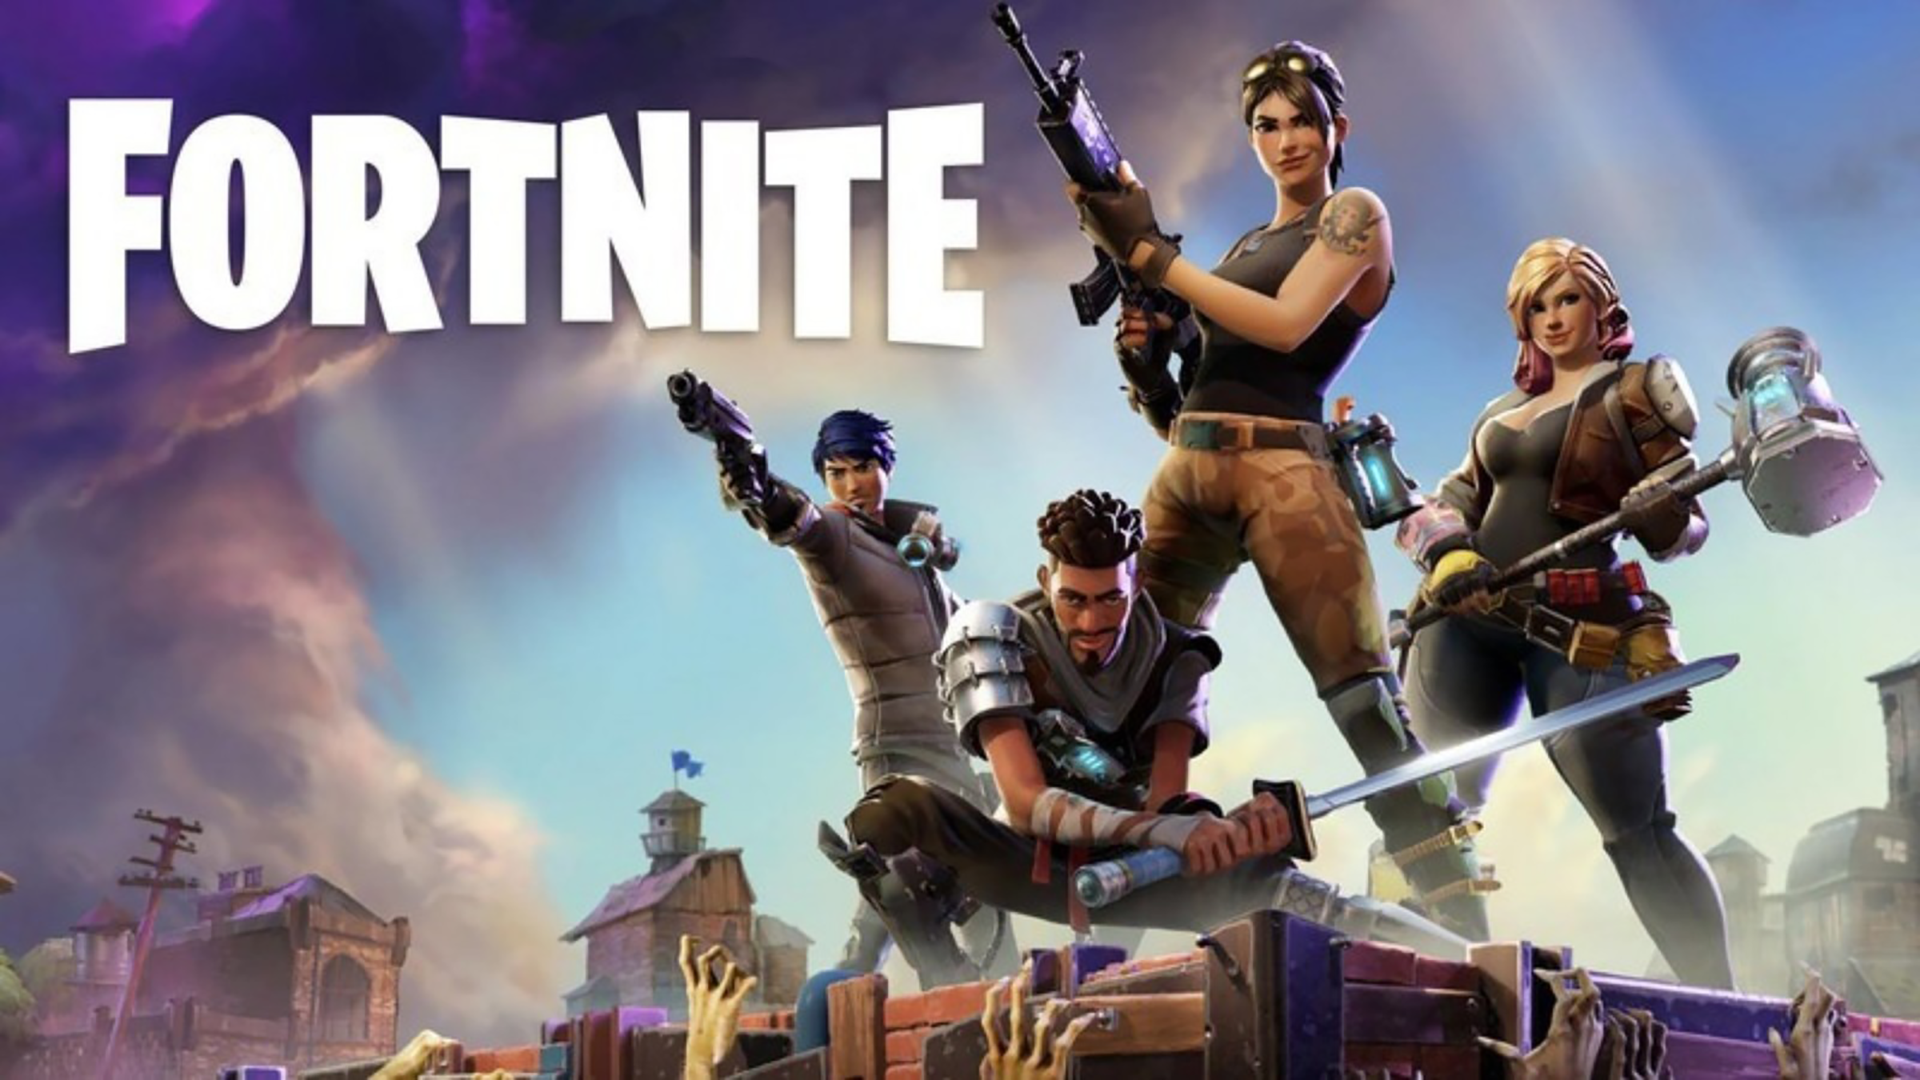 Fortnite Update 3.25 Patch Notes Released (v17.30)